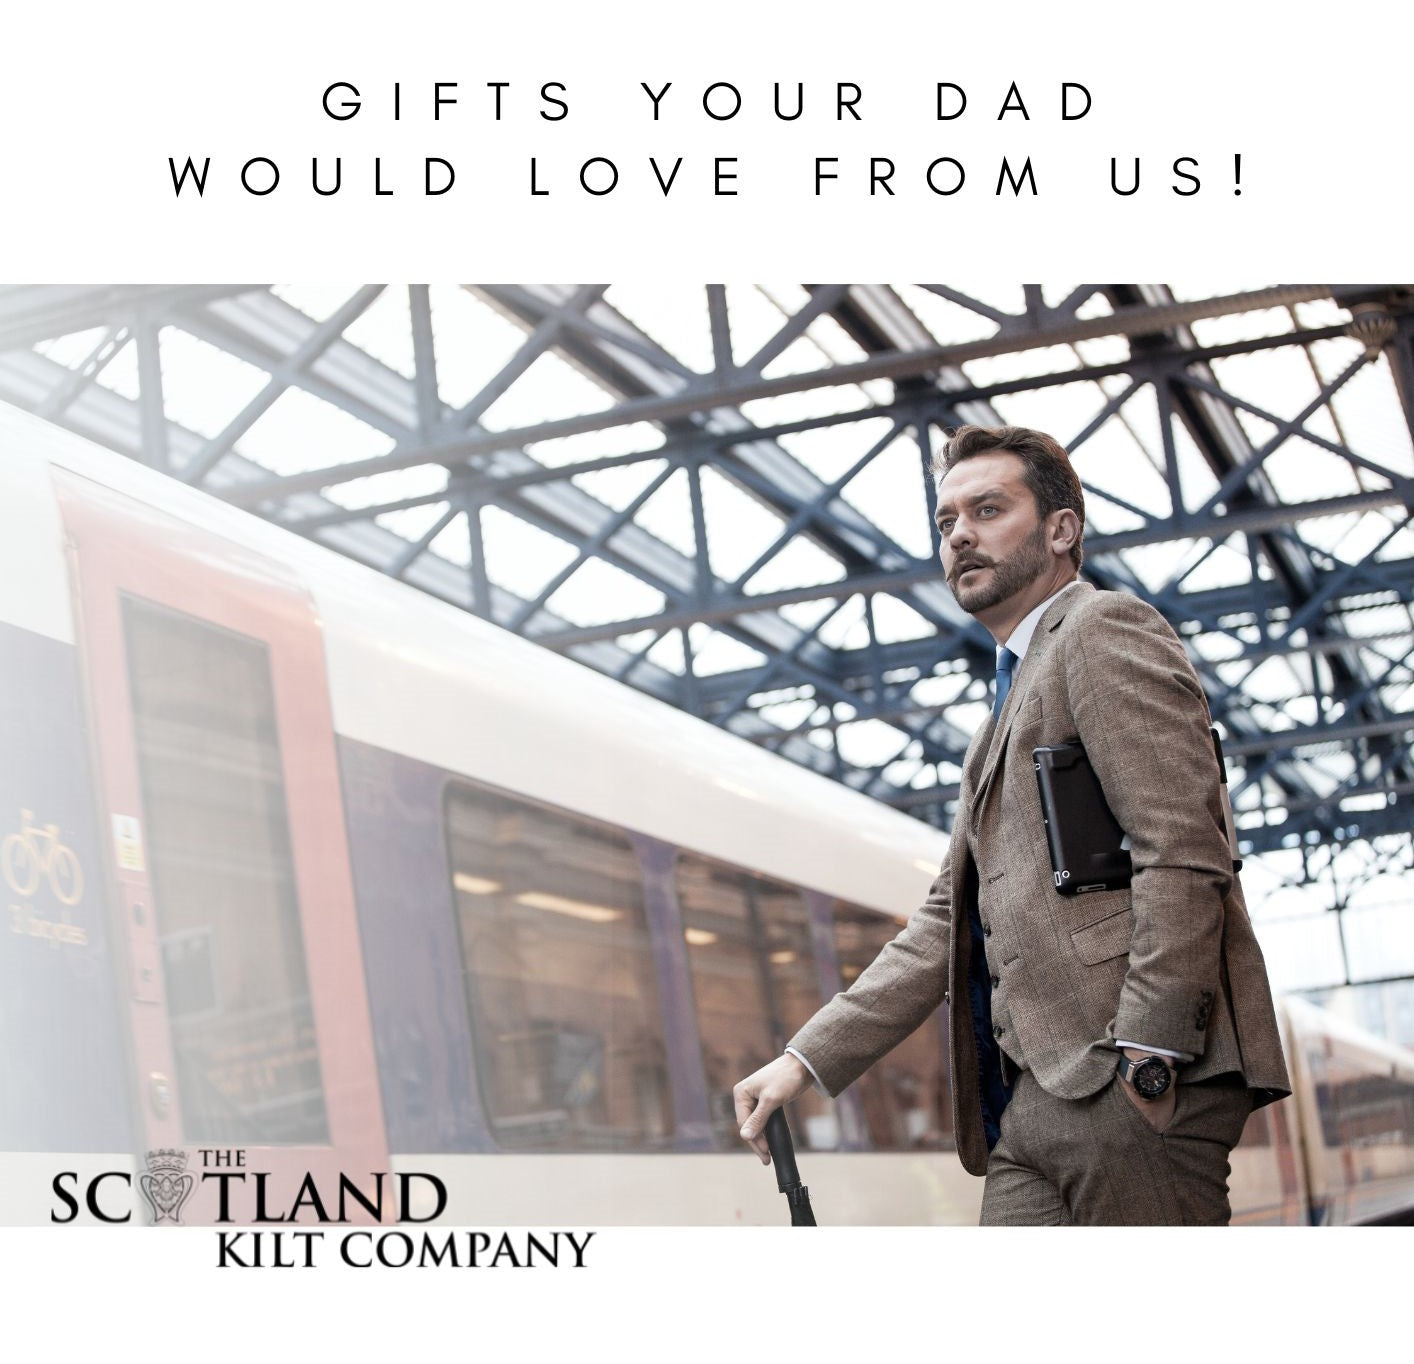 Gifts your dad would love from us!